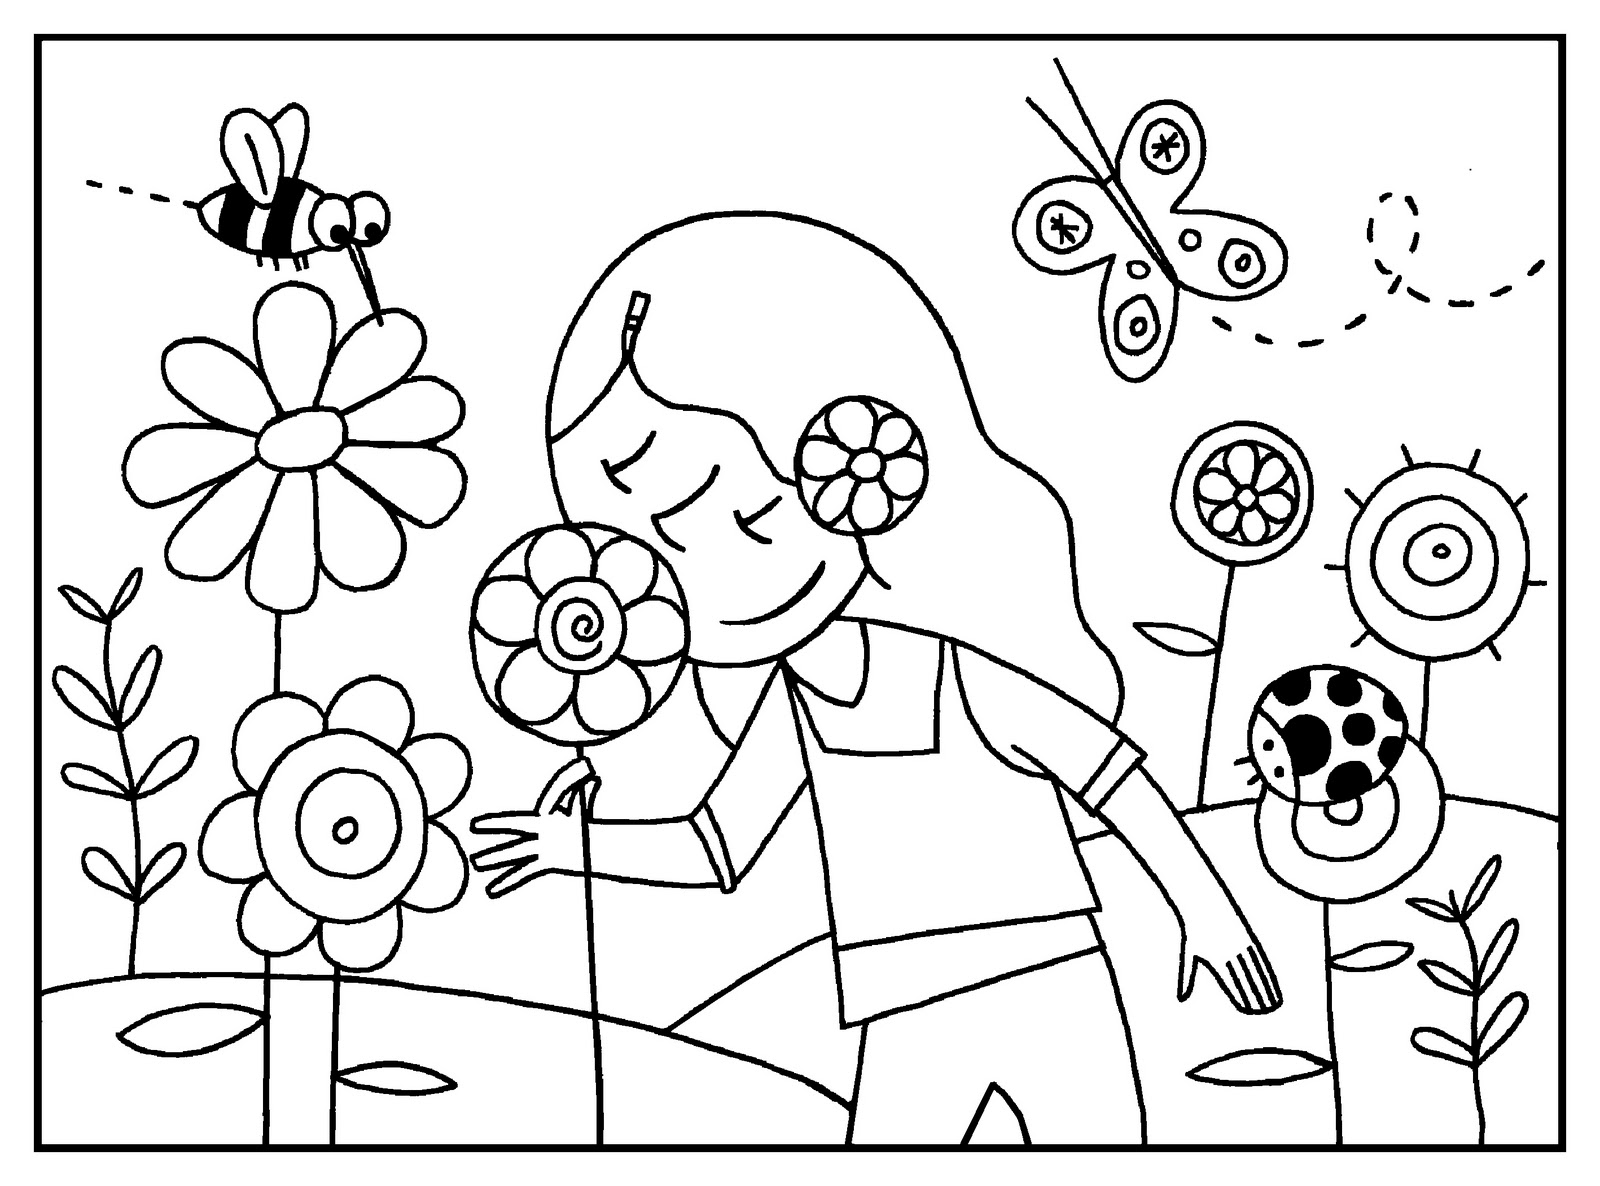 Coloring Garden ~ Child Coloring